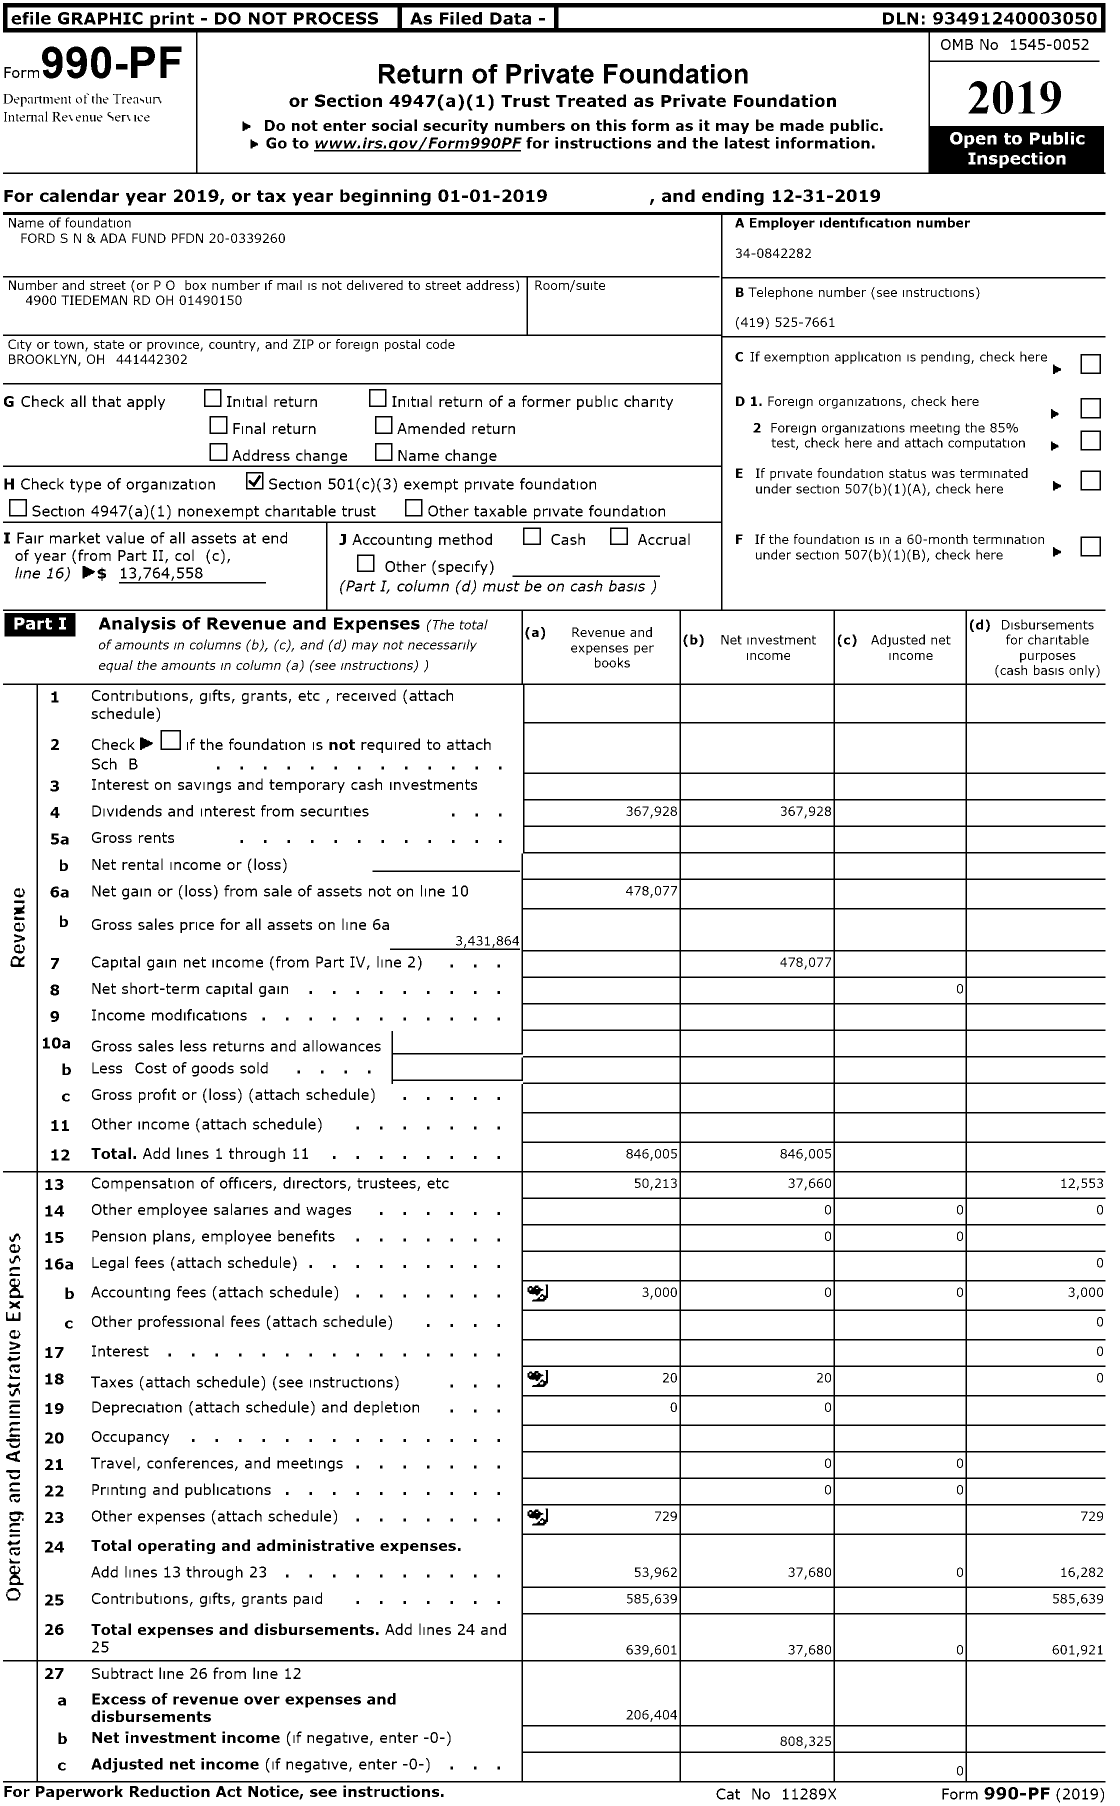 Image of first page of 2019 Form 990PR for Ford S N and Ada Fund PFDN